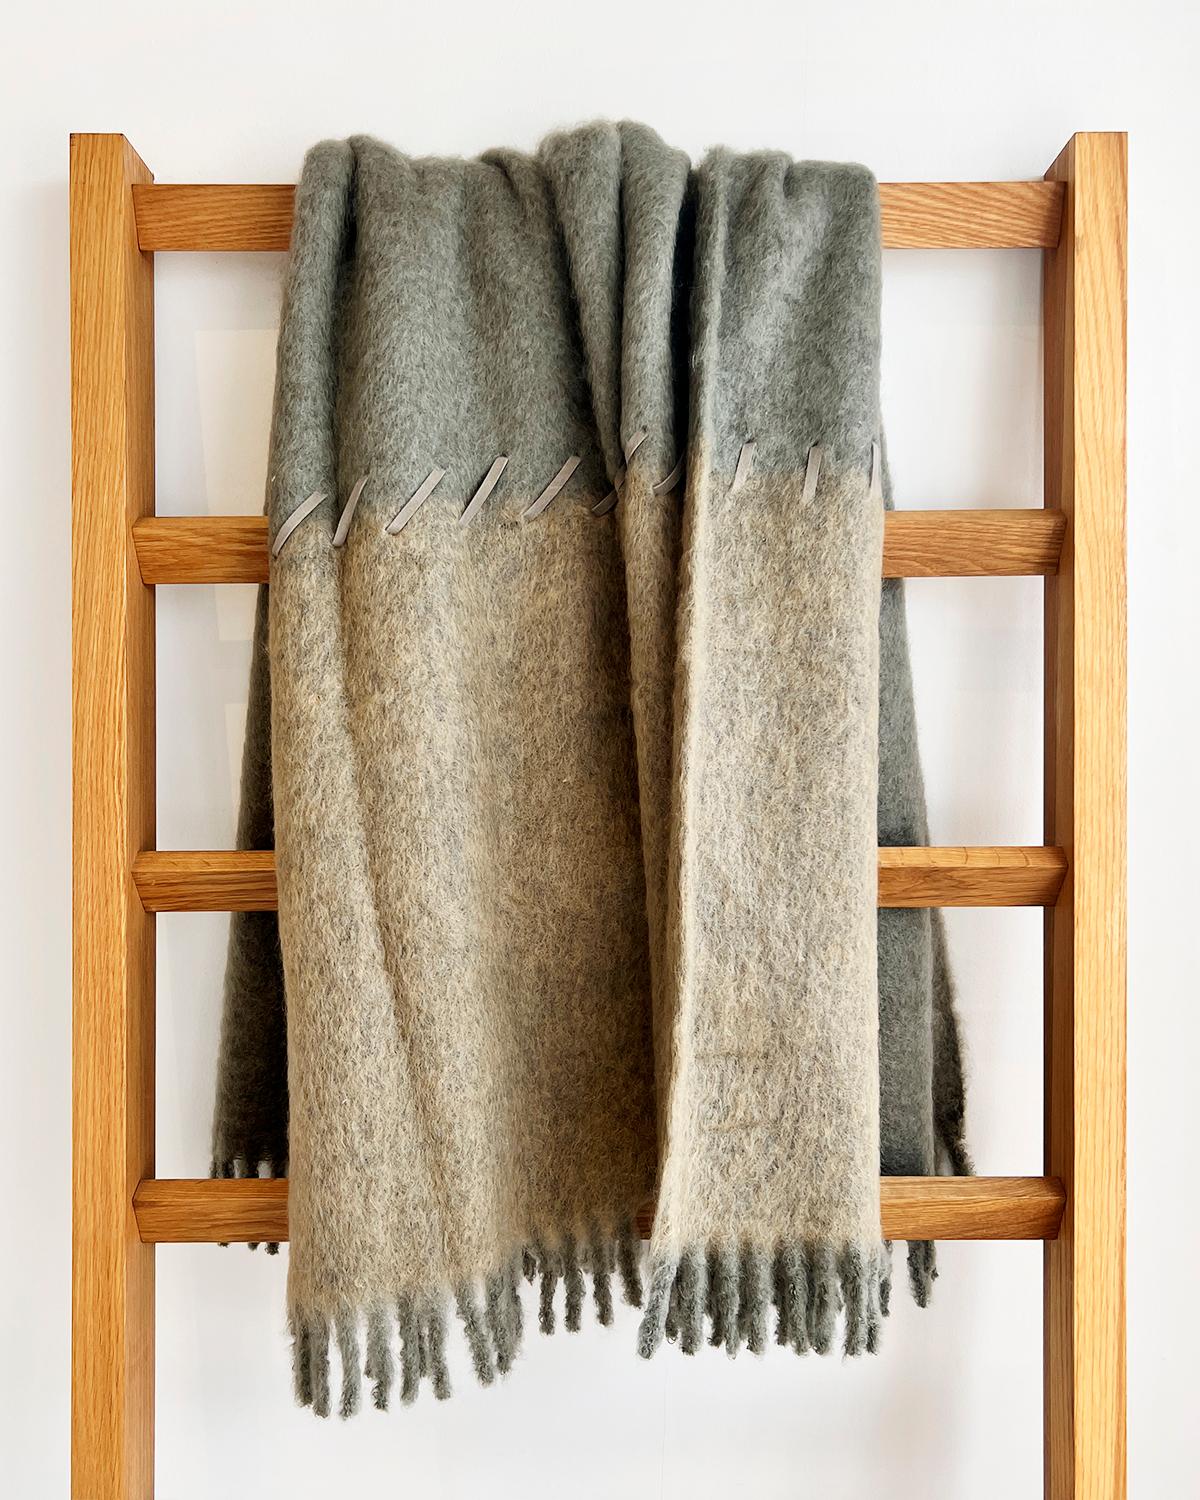 This Sage and Moss Mohair Blanket is crafted with mohair and features two-toned medium green and light green colors with a suede whipstitch accent. It's soft and cozy, perfect for the winter season, and its classic design makes it an excellent